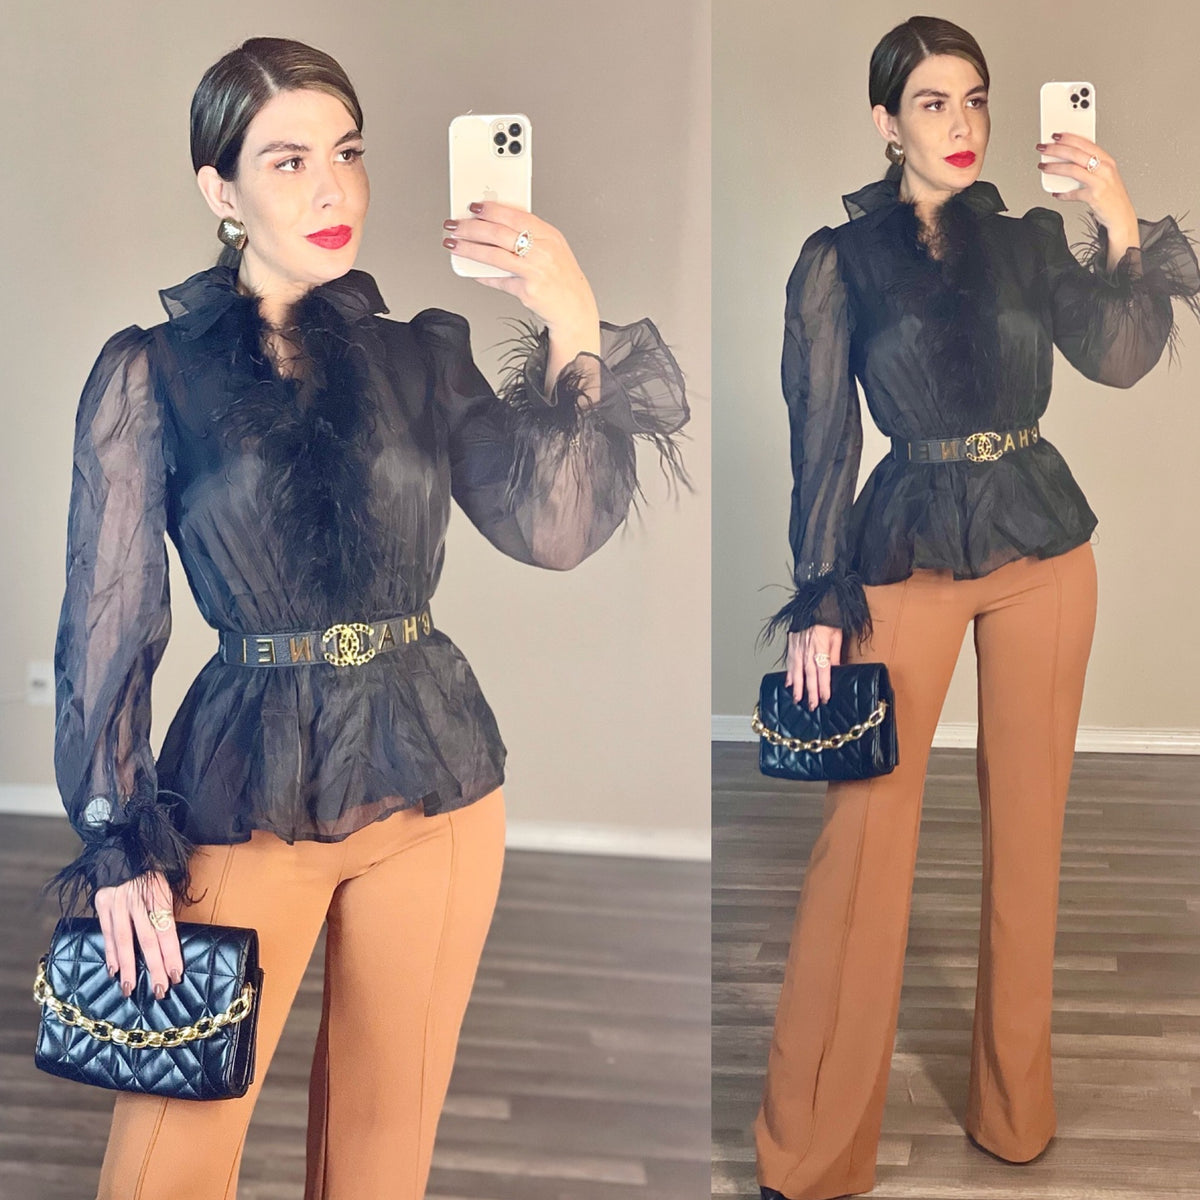 Chanel Black Knit Top – Dina C's Fab and Funky Consignment Boutique